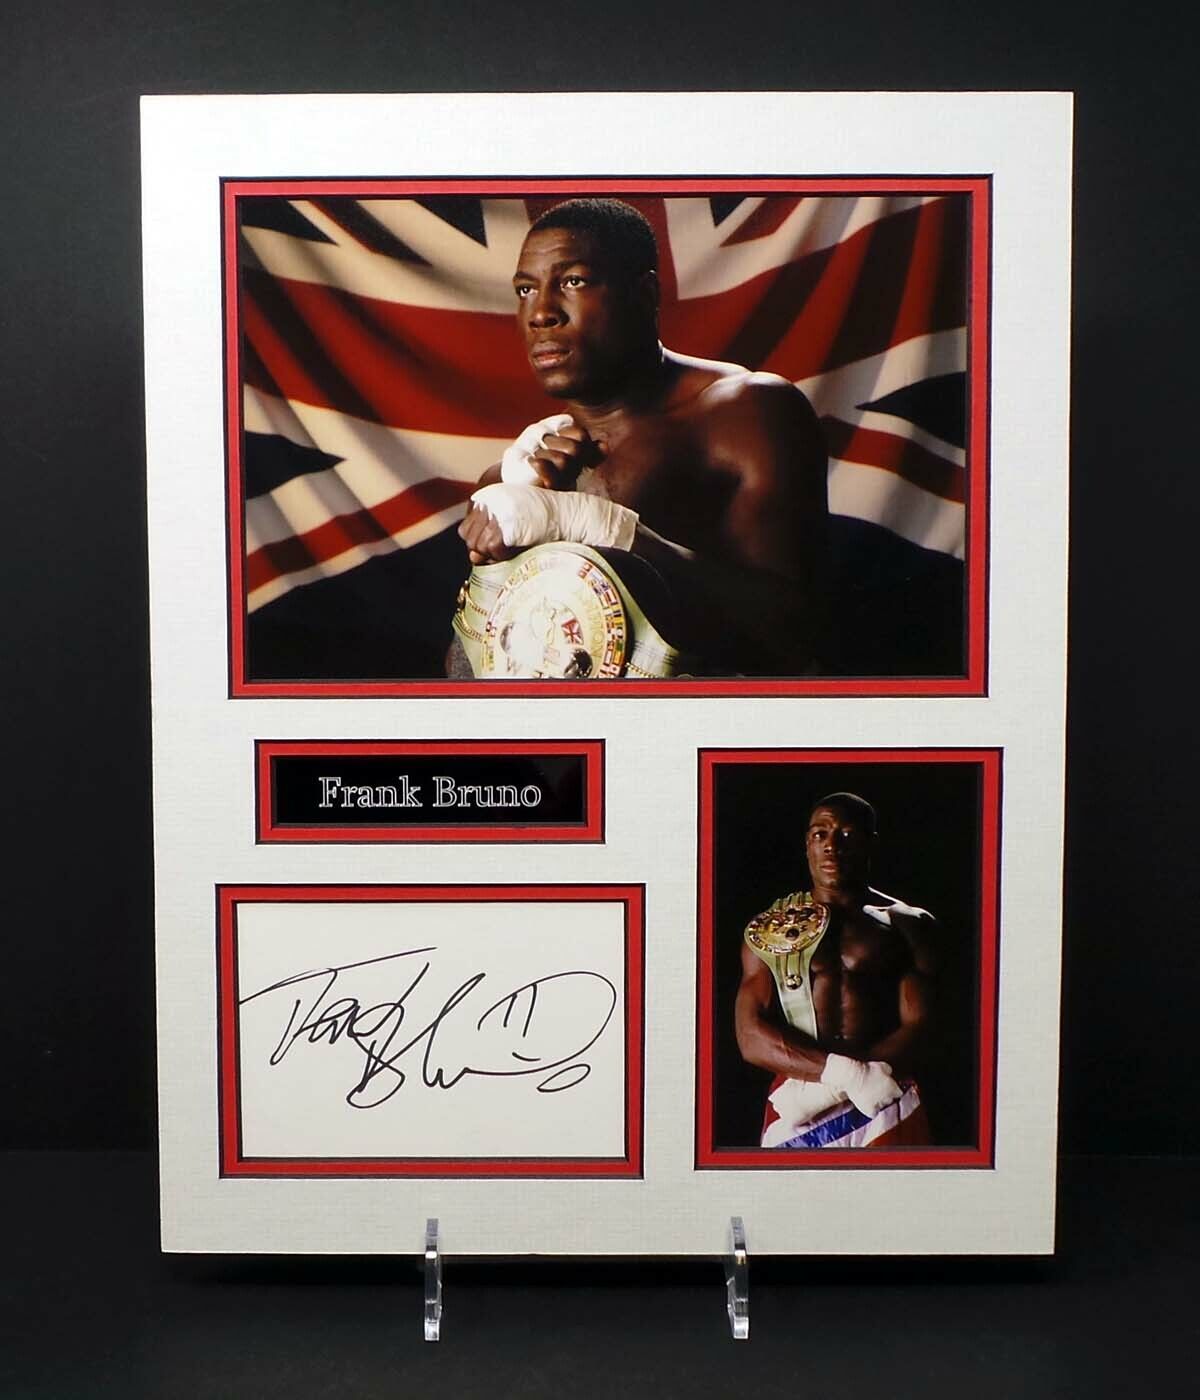 Frank BRUNO Signed Mounted 14X11 Photo Poster painting Display AFTAL RD COA British Boxer Legend